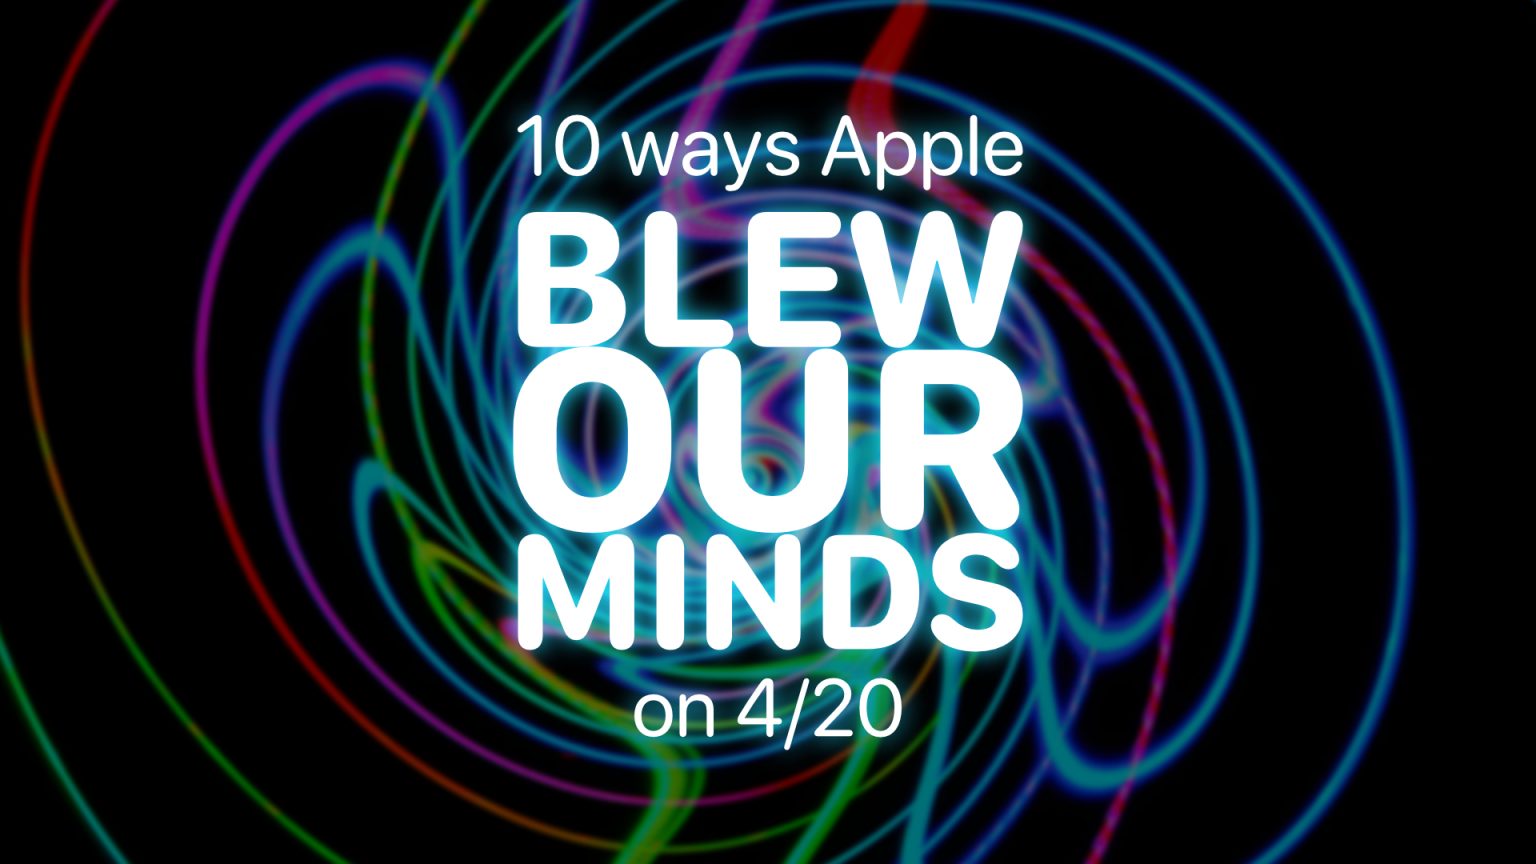 Apple Spring Loaded event: 10 ways Apple blew our minds on 4/20.